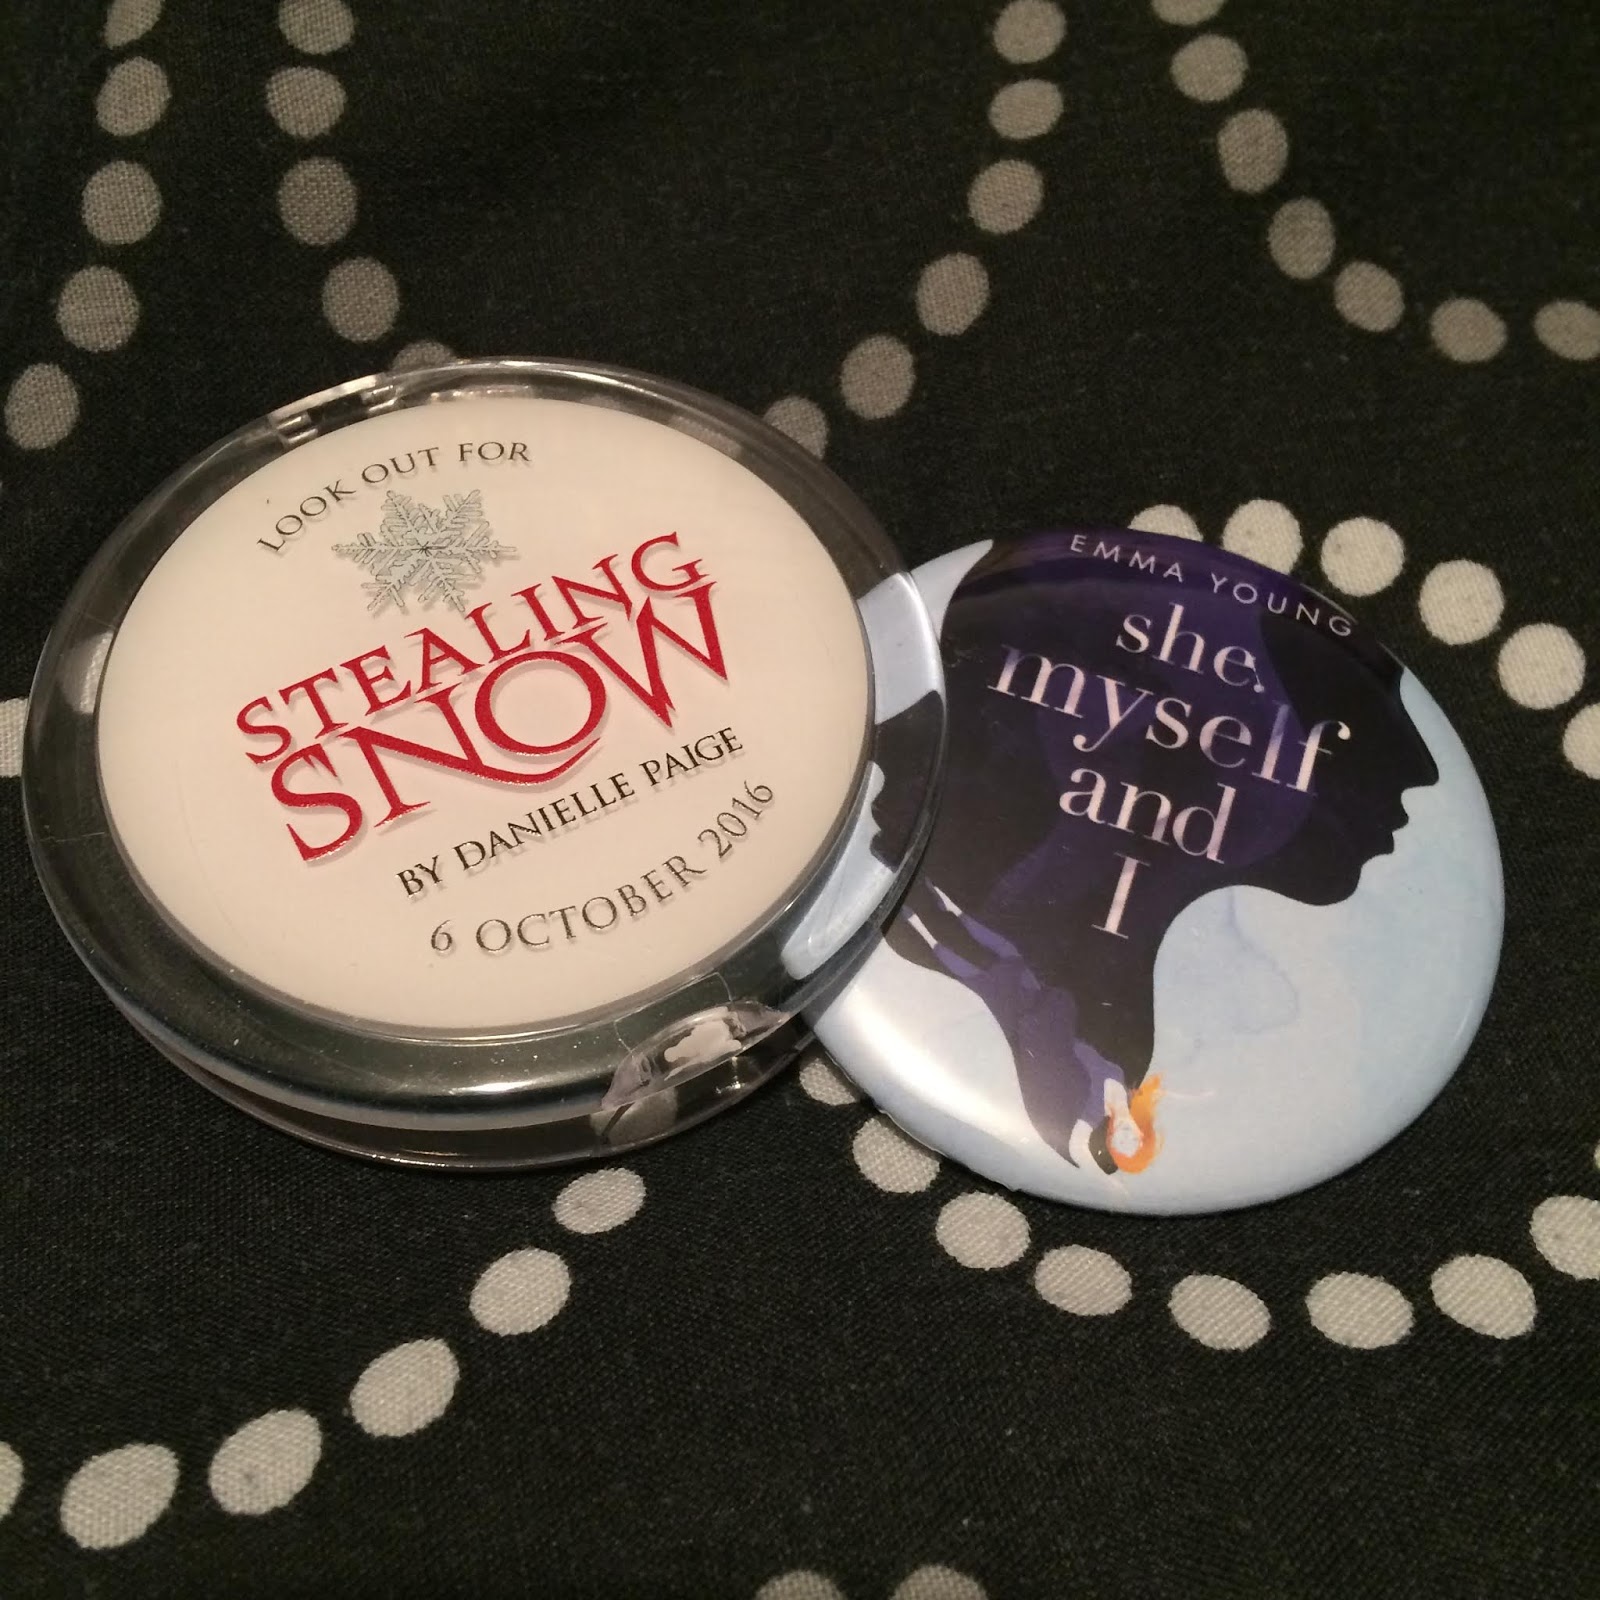 Two mirrors. One compact mirror for stealing snow, and another mirror similar to a badge, but with a mirror on the reverse, for She, Myself and I